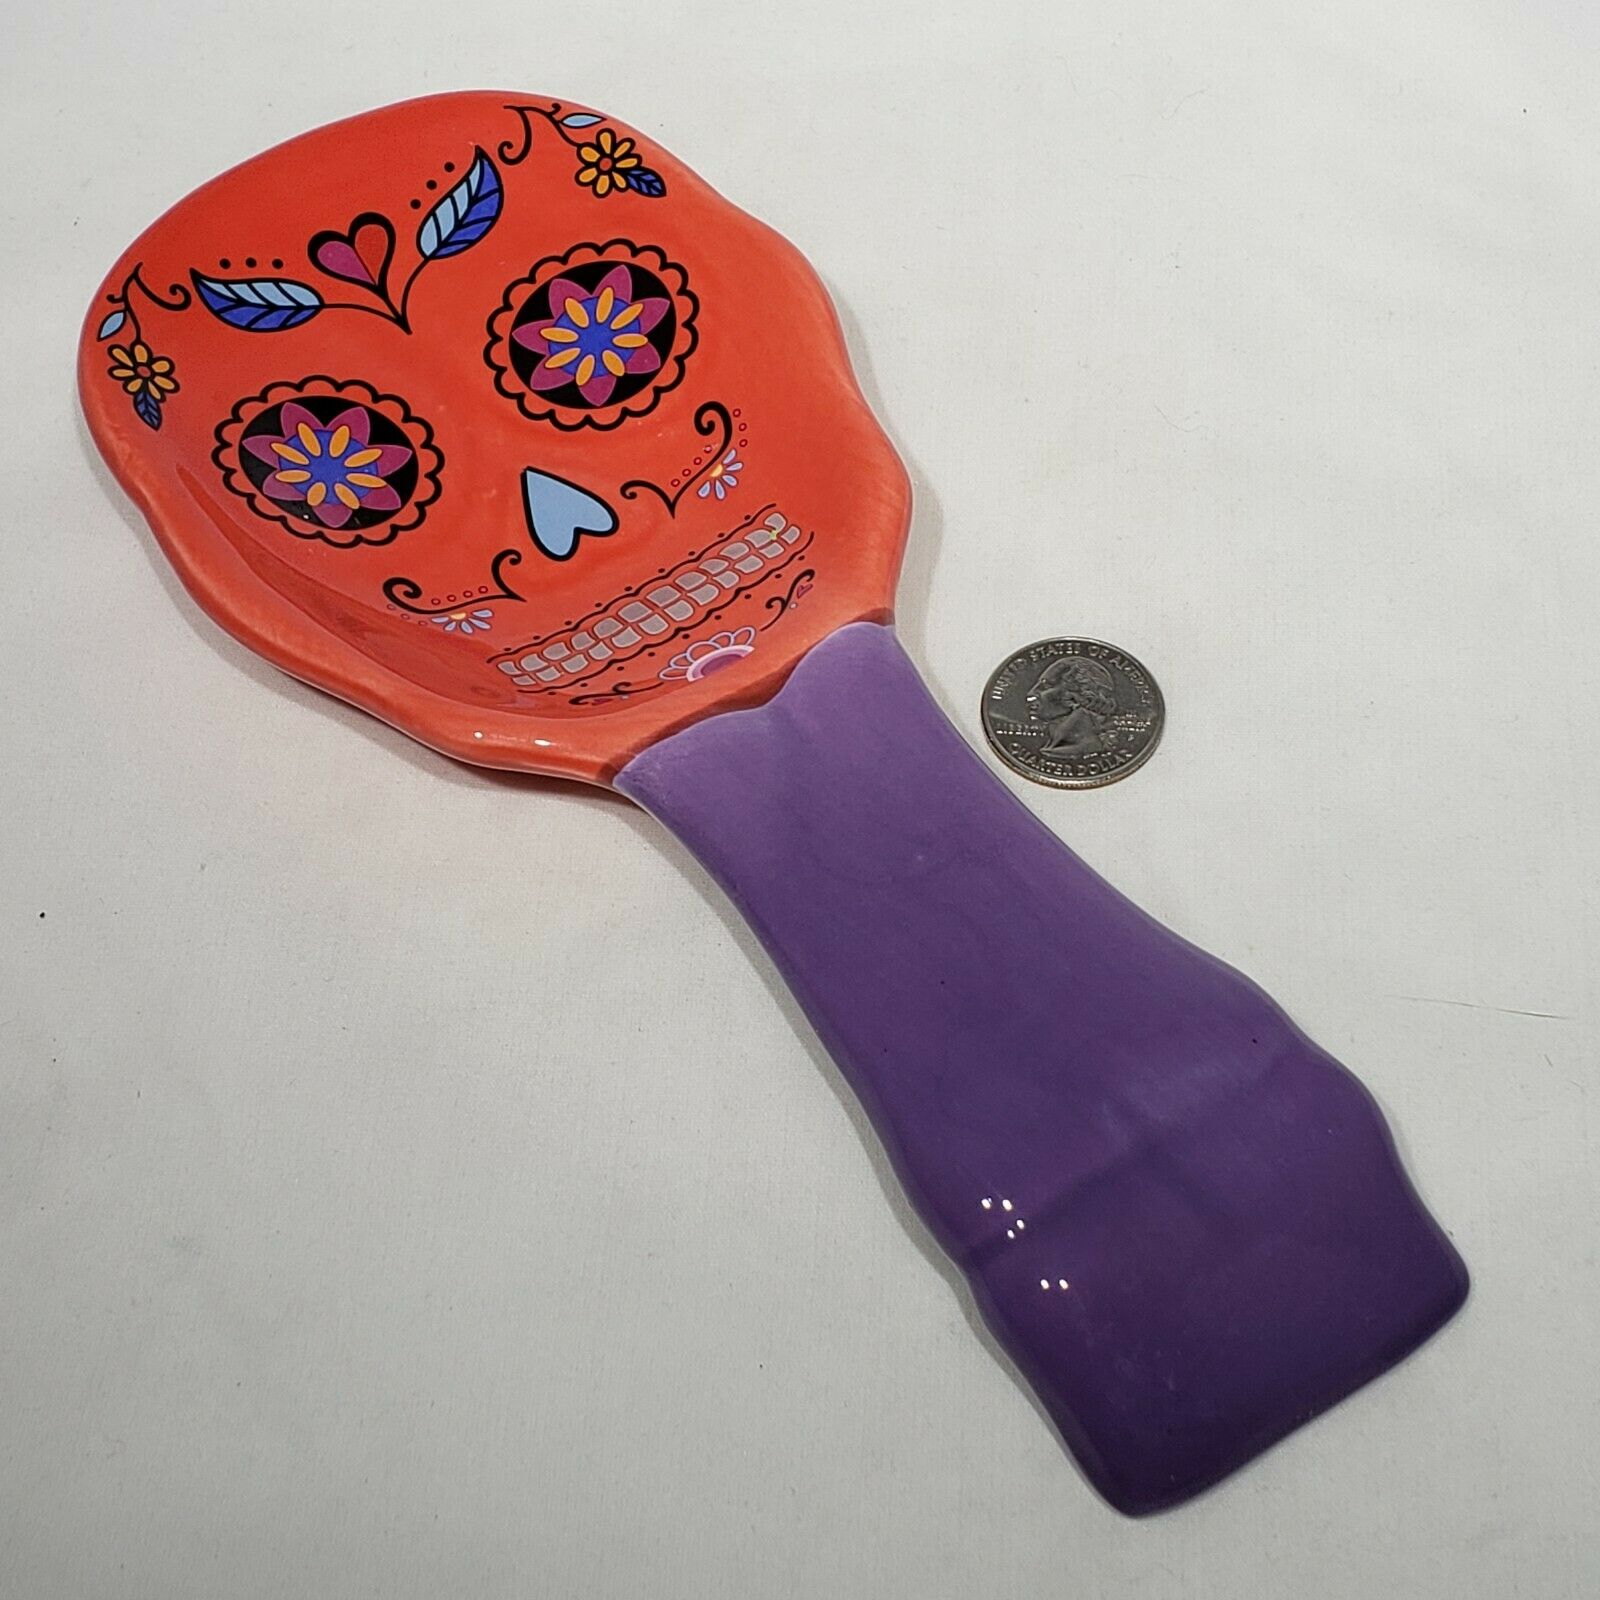 Red Sugar Skull Day Of The Dead Spoon Rest Kitchen Halloween Decor